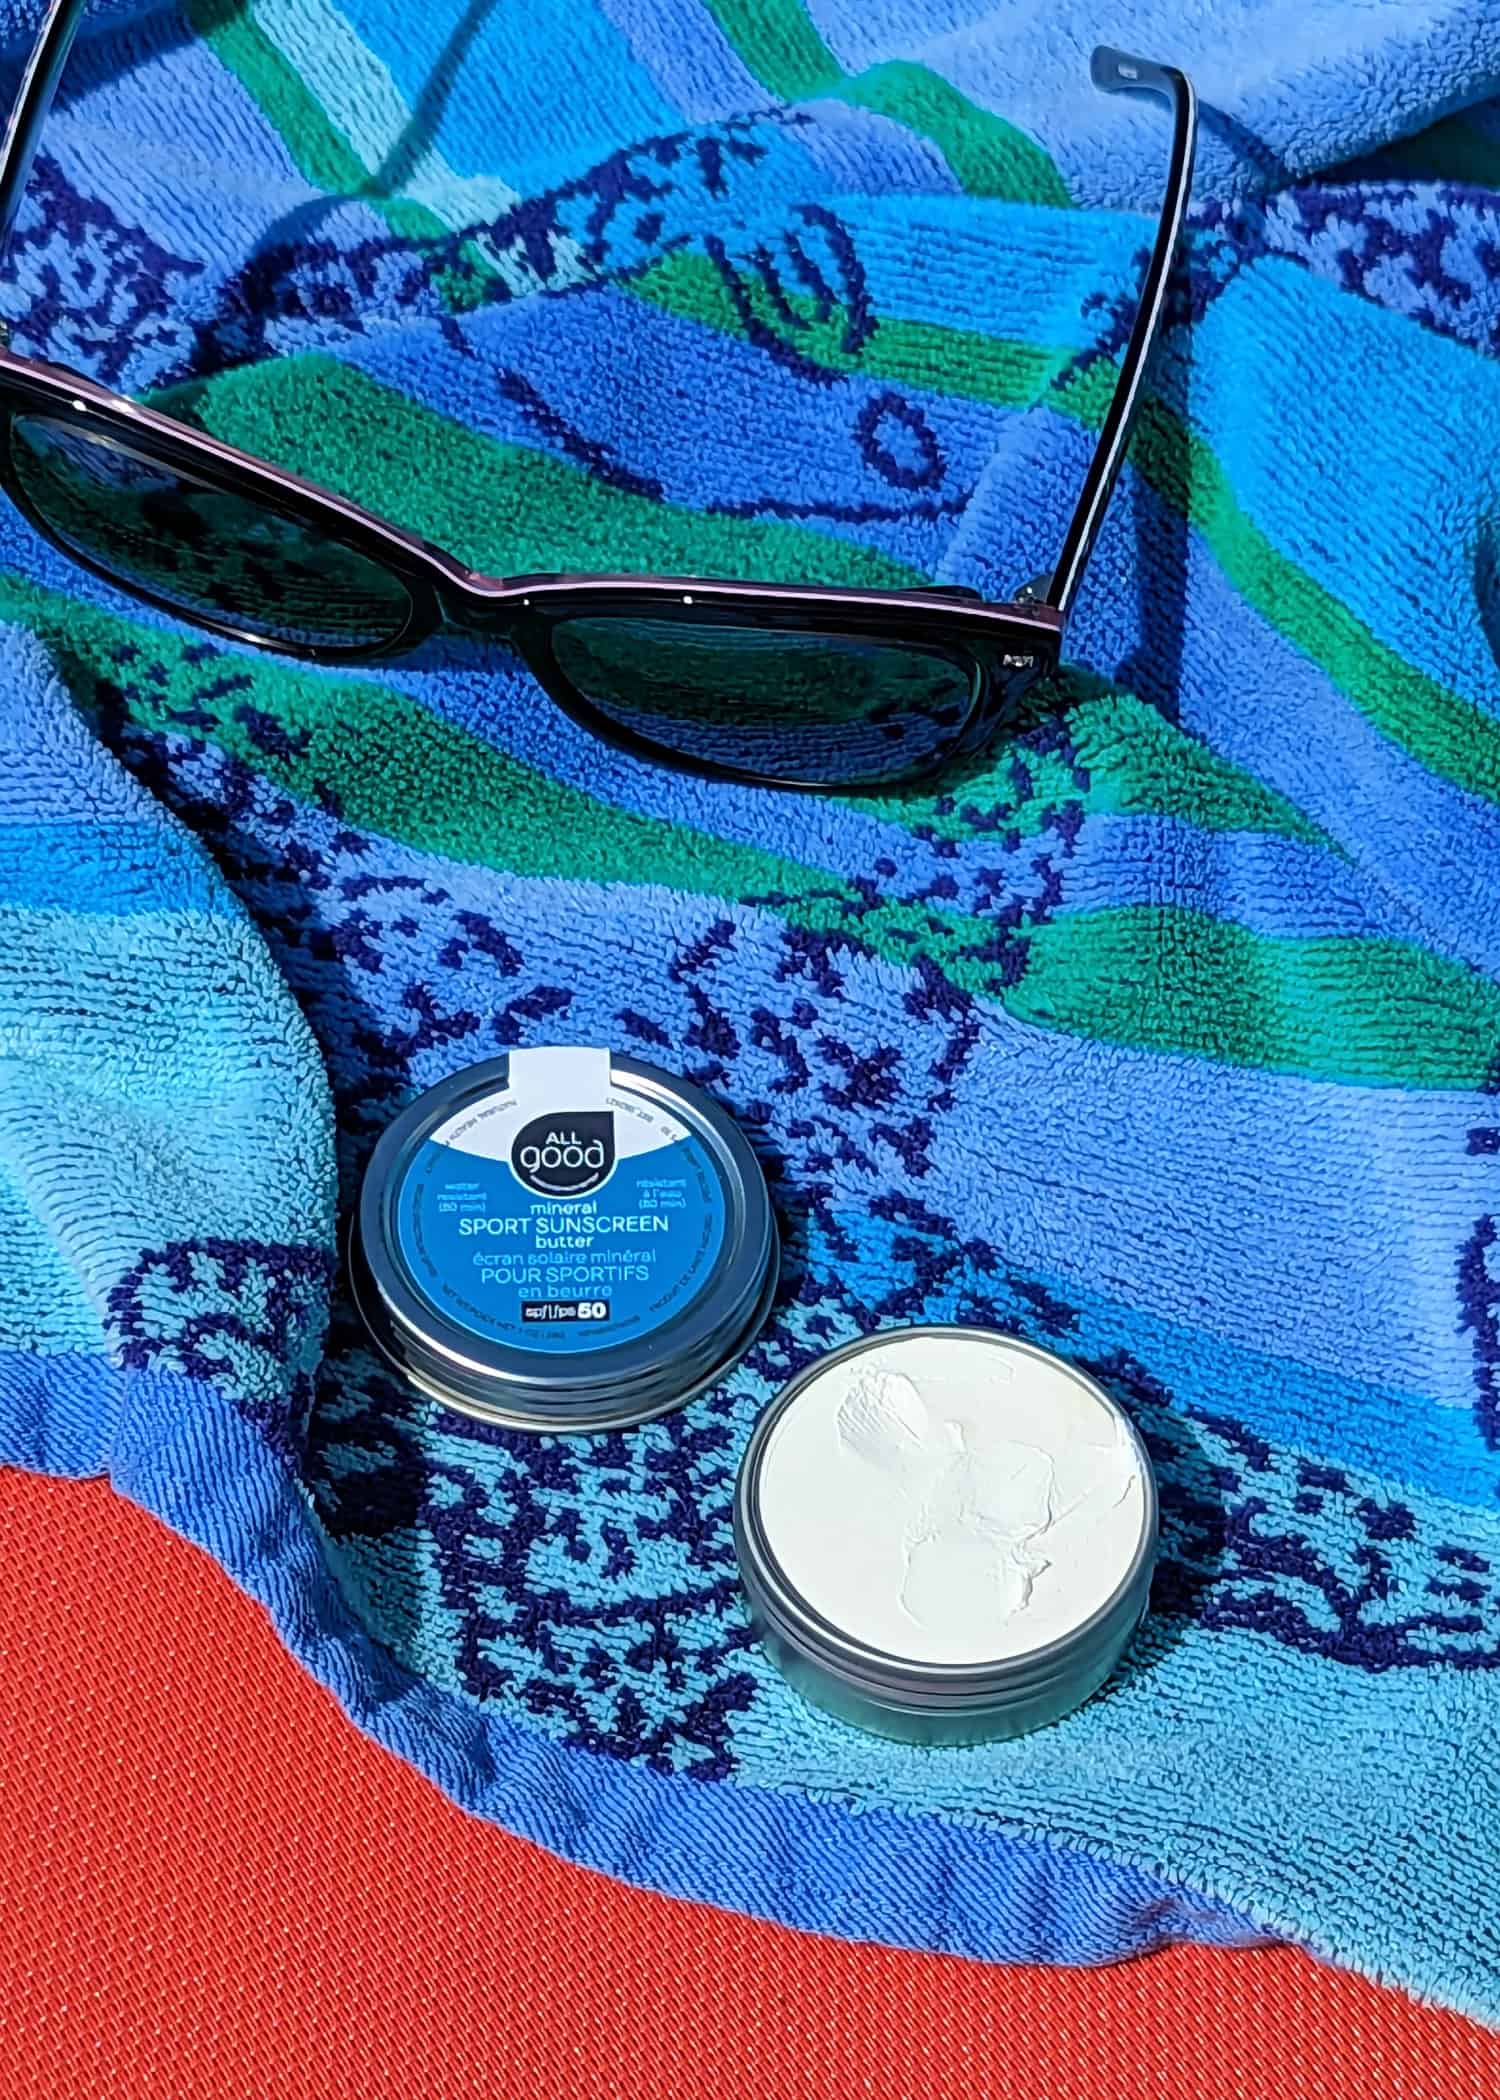 Blue beach towel on top of orange pool lounge chair. An opened tin of creamy All Good Zinc Butter sunscreen is sitting on top of the towel next to a pair of sunglasses.